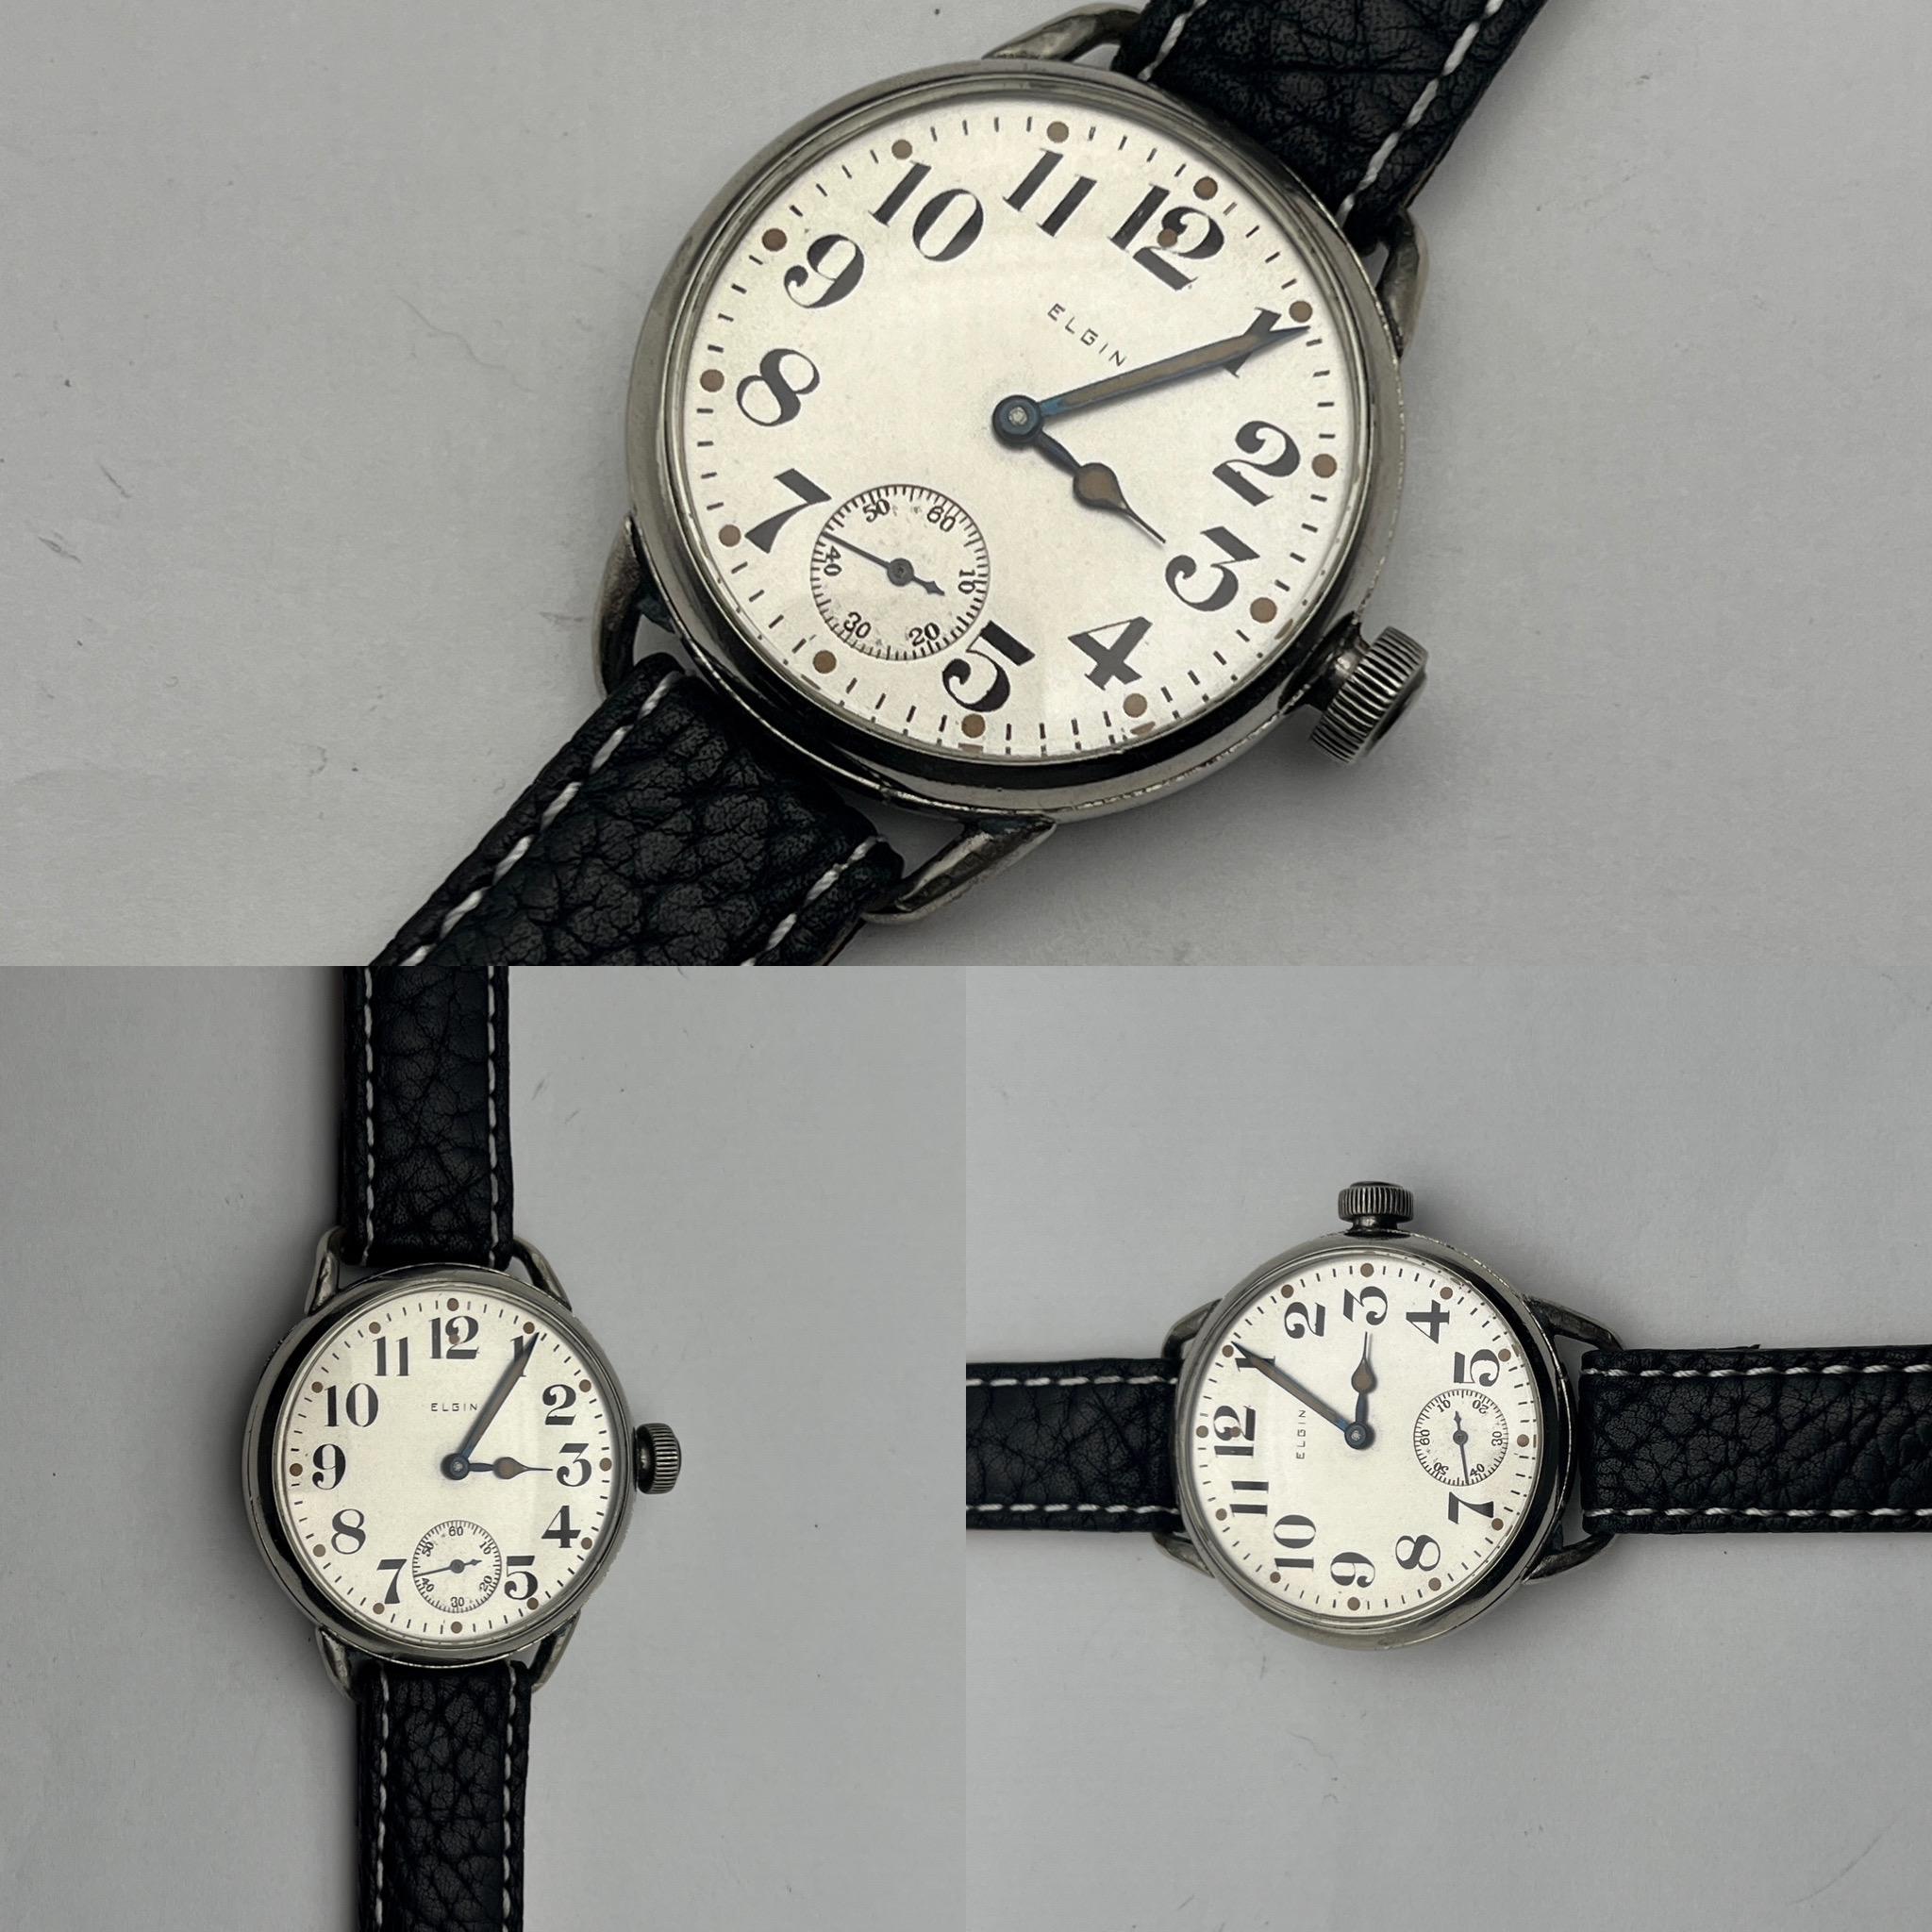 My shop was recently selected to supply vintage American watches for a premier movie starring some major actors and a world-famous director. 

They were looking for authentic watches that would represent the time period from 1915-1926. I was